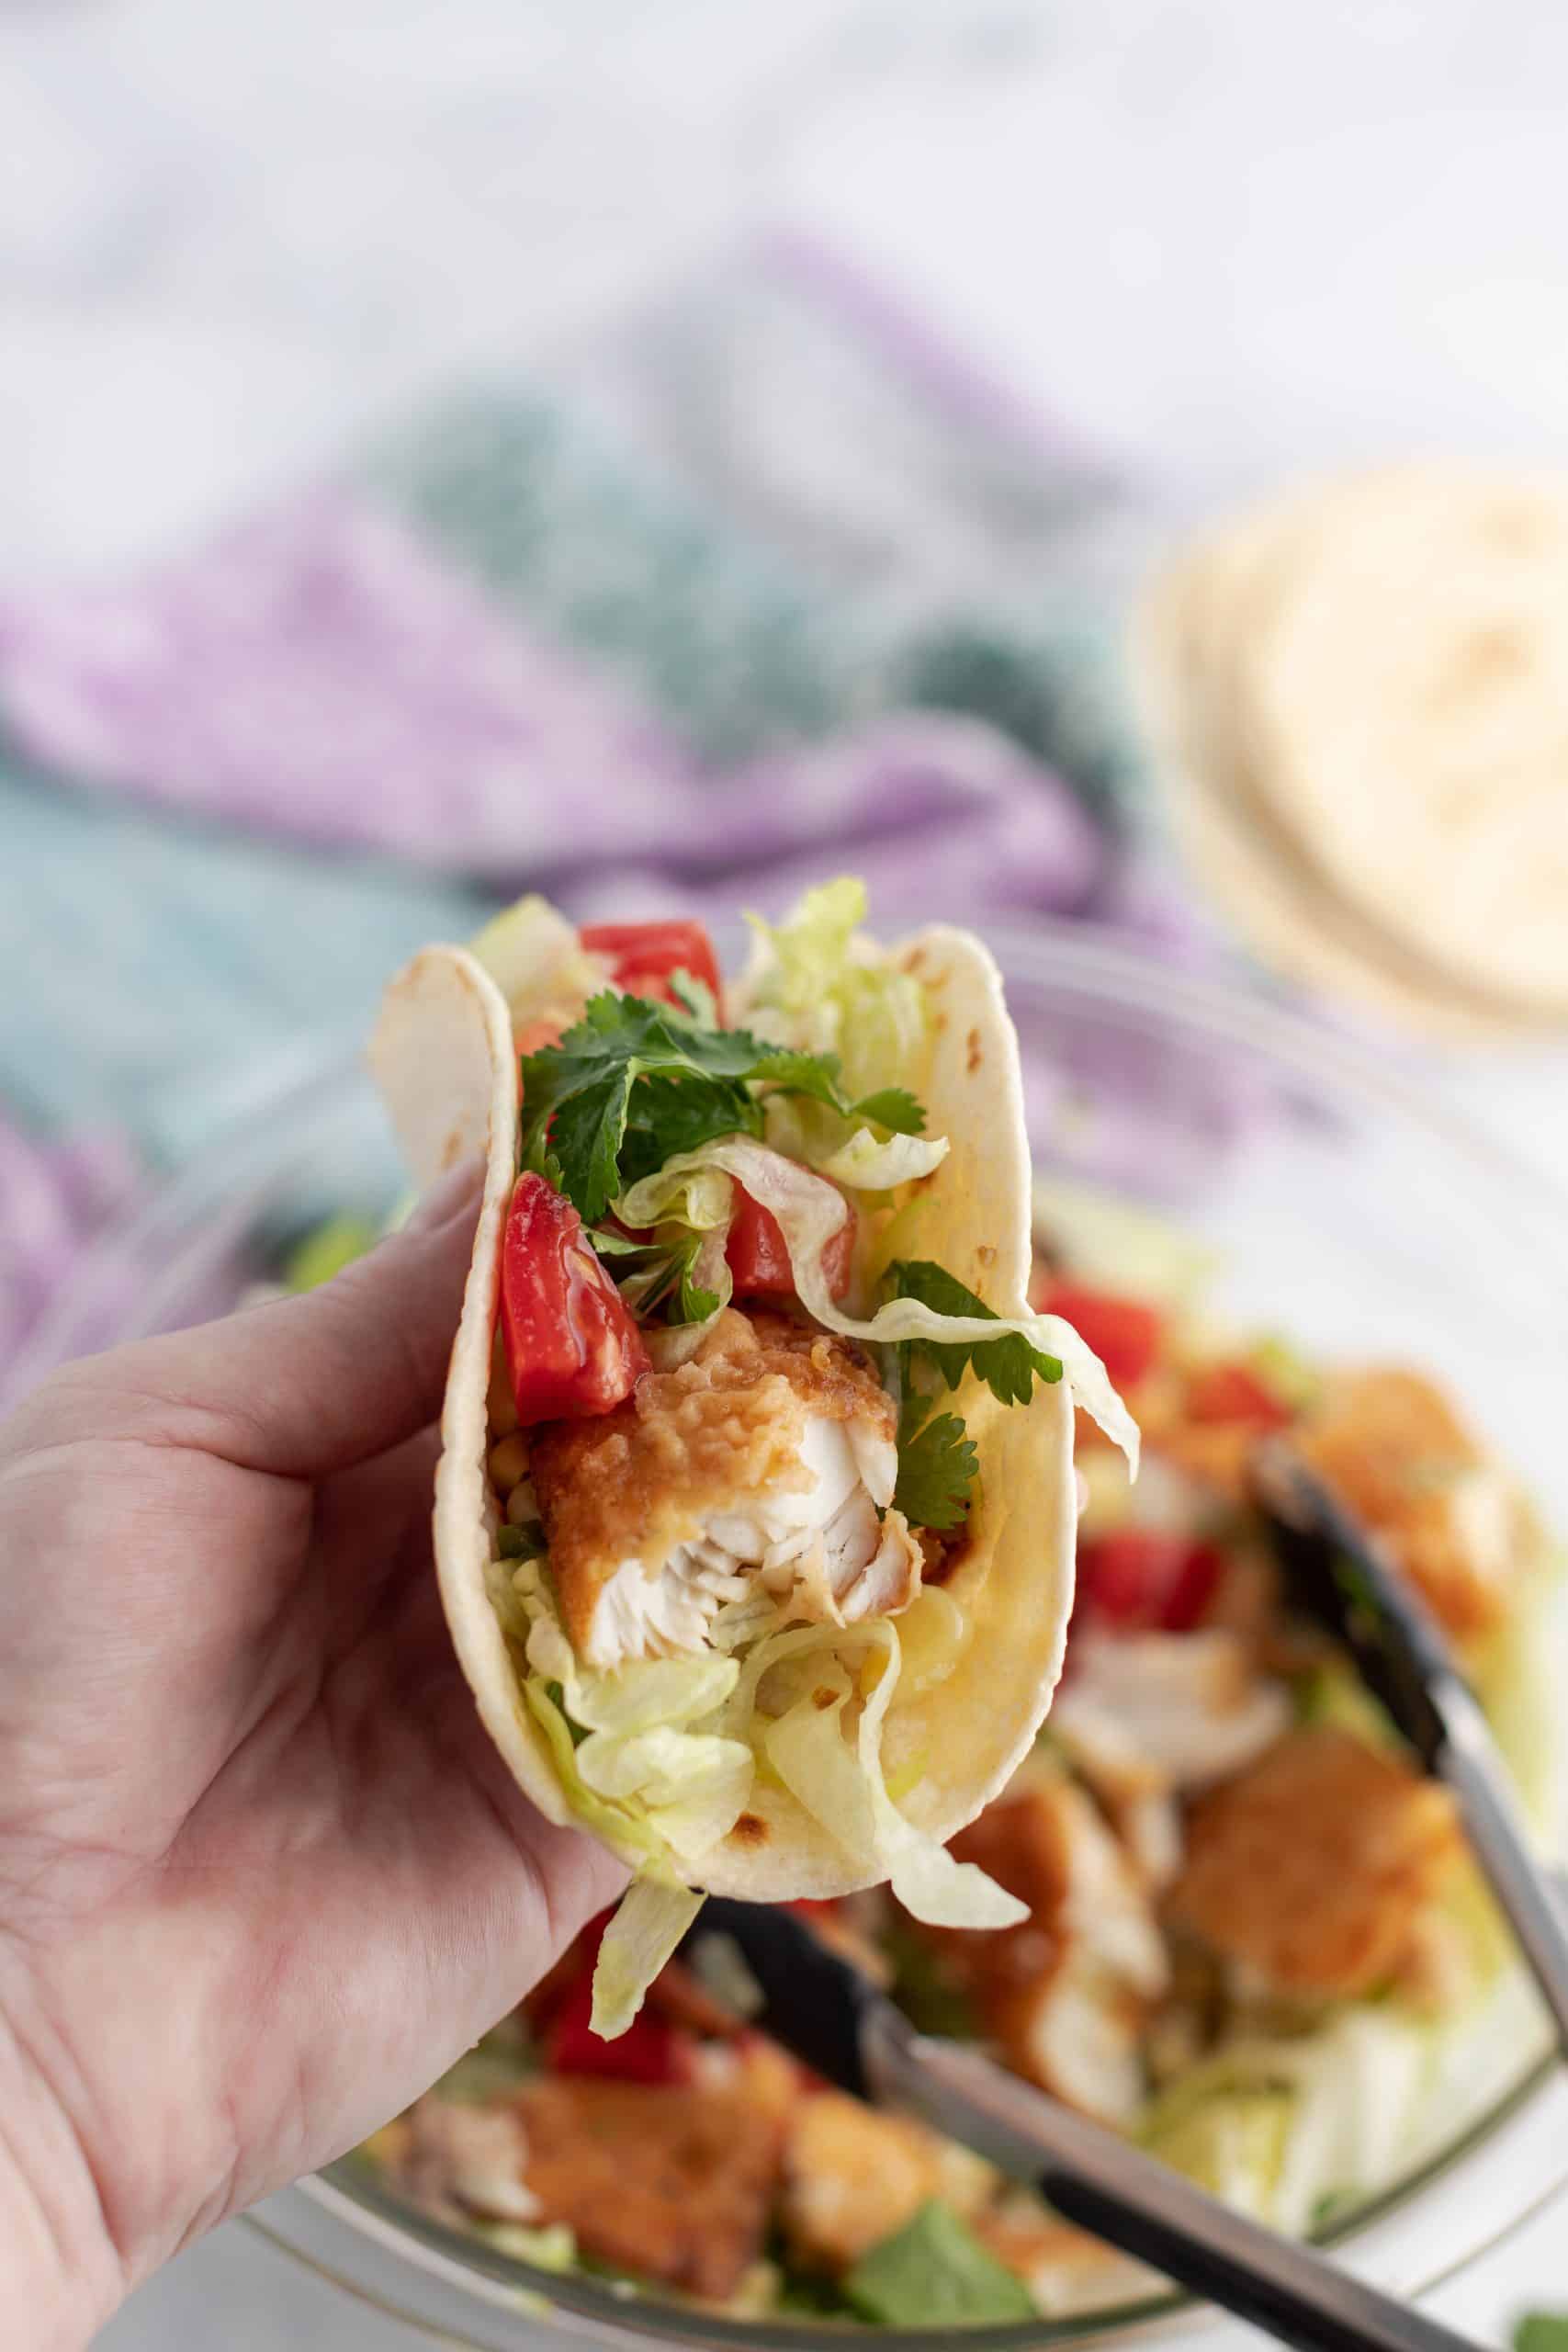 Fish taco on a flour tortilla being held up for a bite.